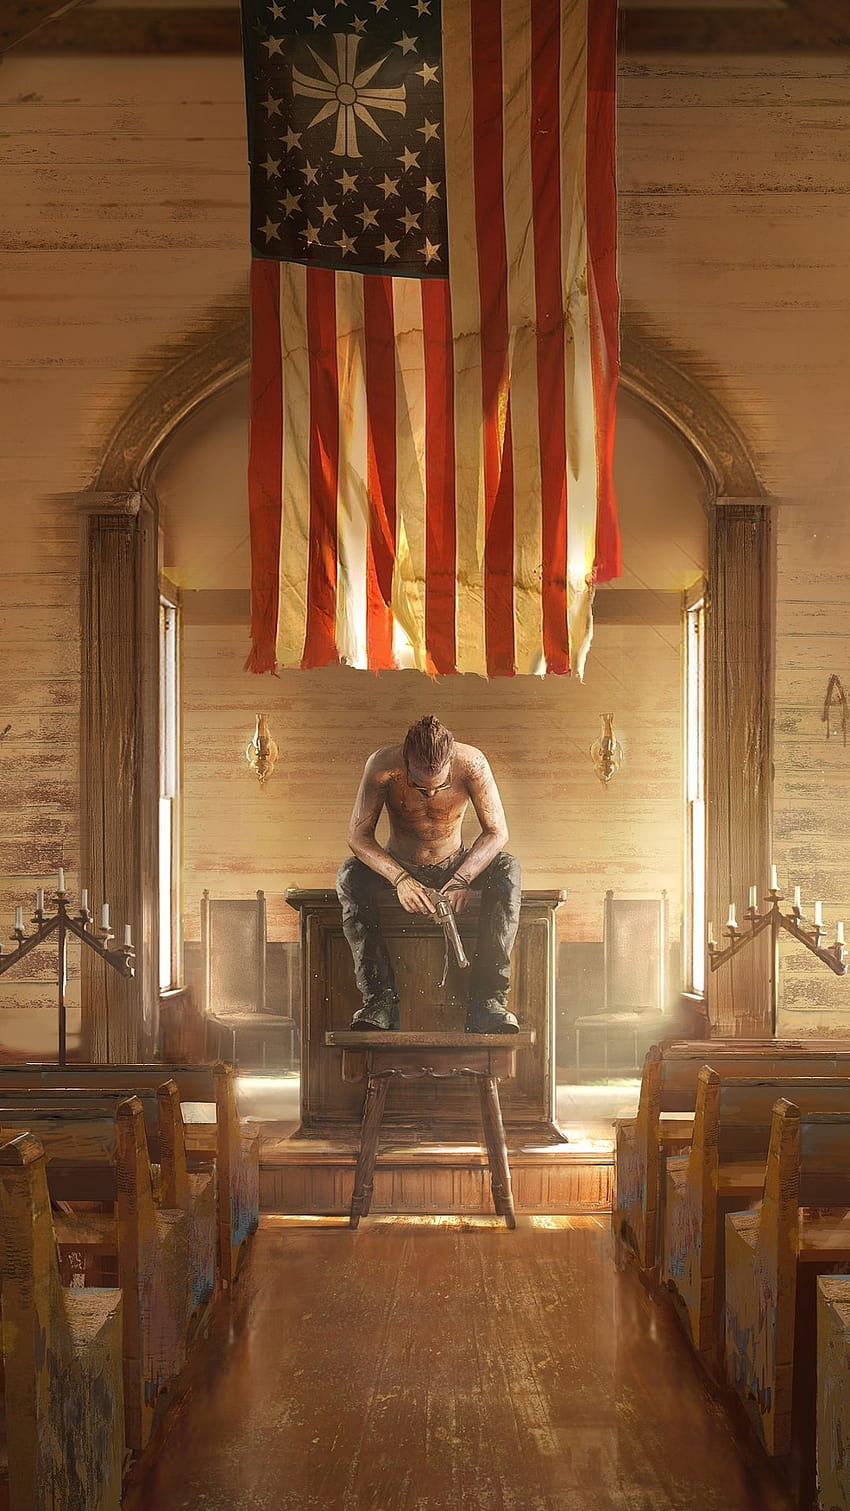 Far cry 5 is the best game since far cry 3, far cry 5 mobile HD phone wallpaper